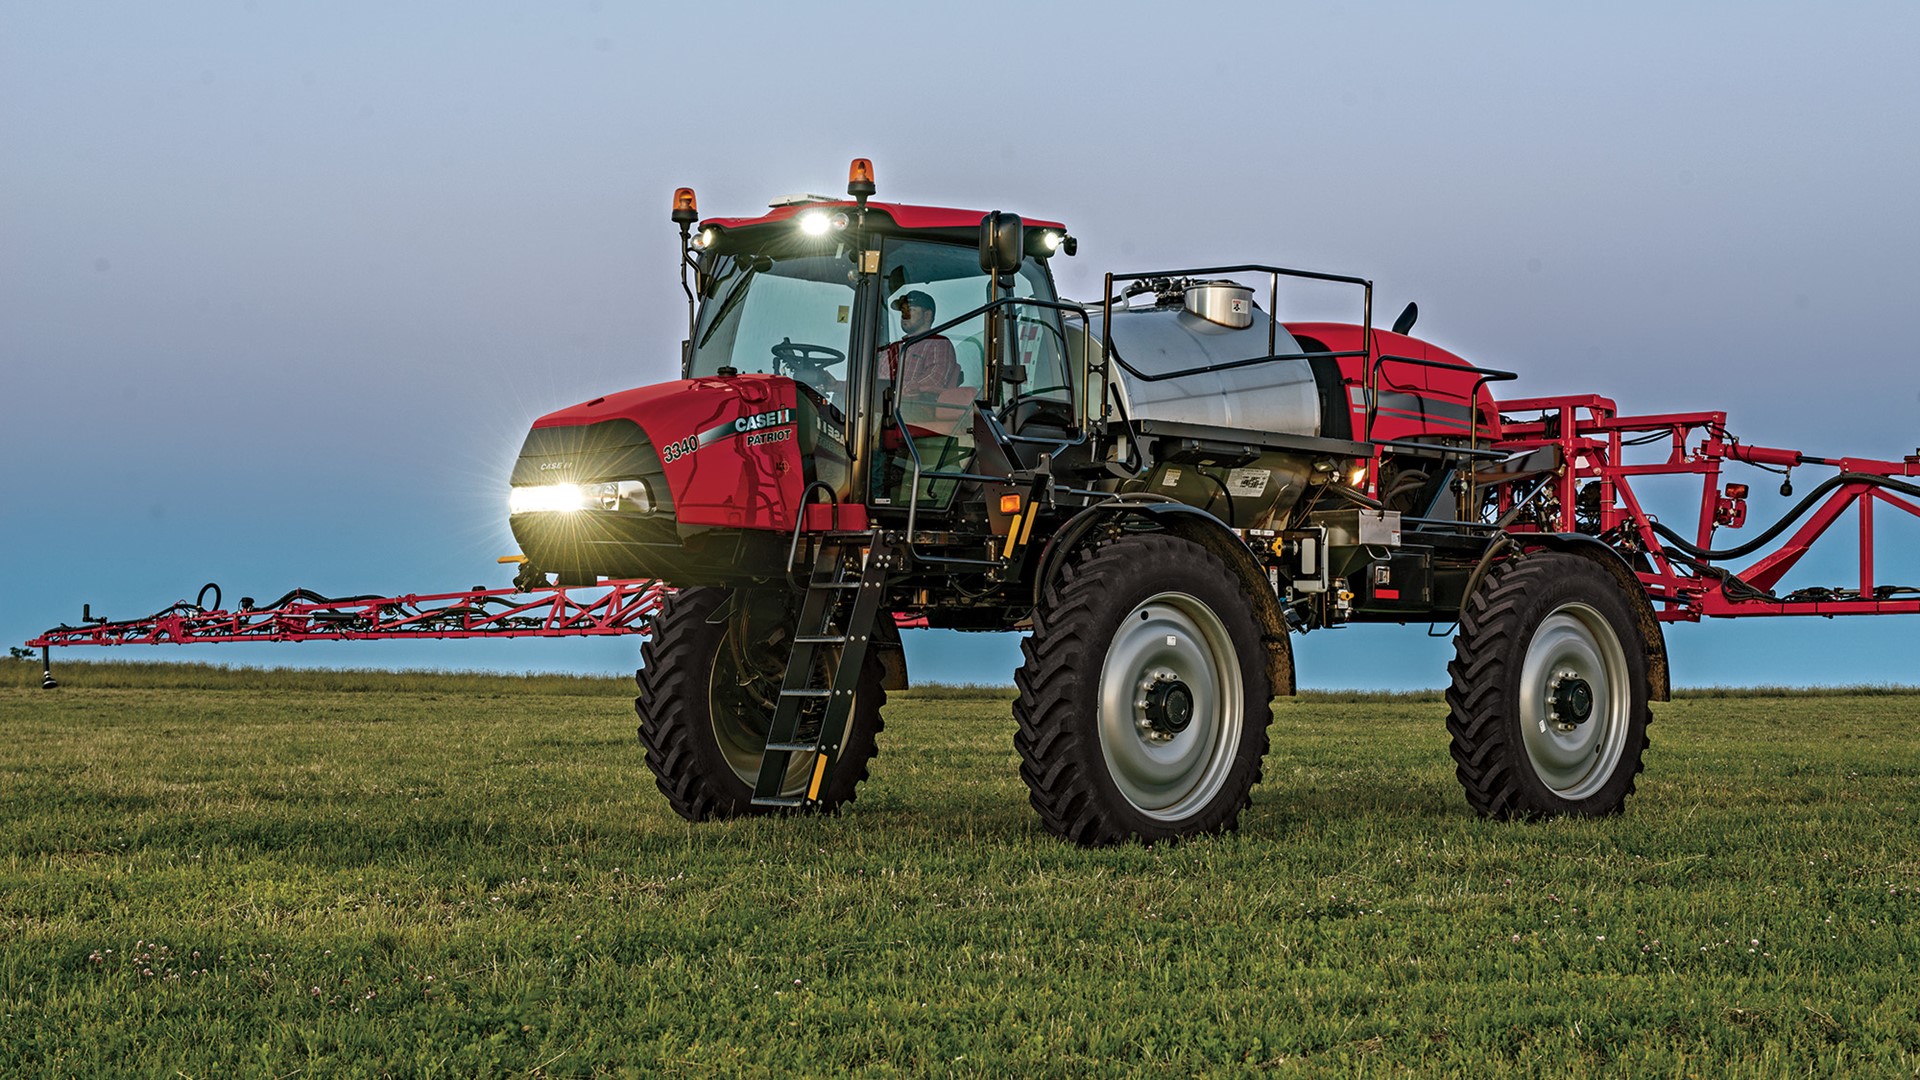 AFS Accuturn Automated headland-turning technology is now available on Case IH Patriot series sprayers